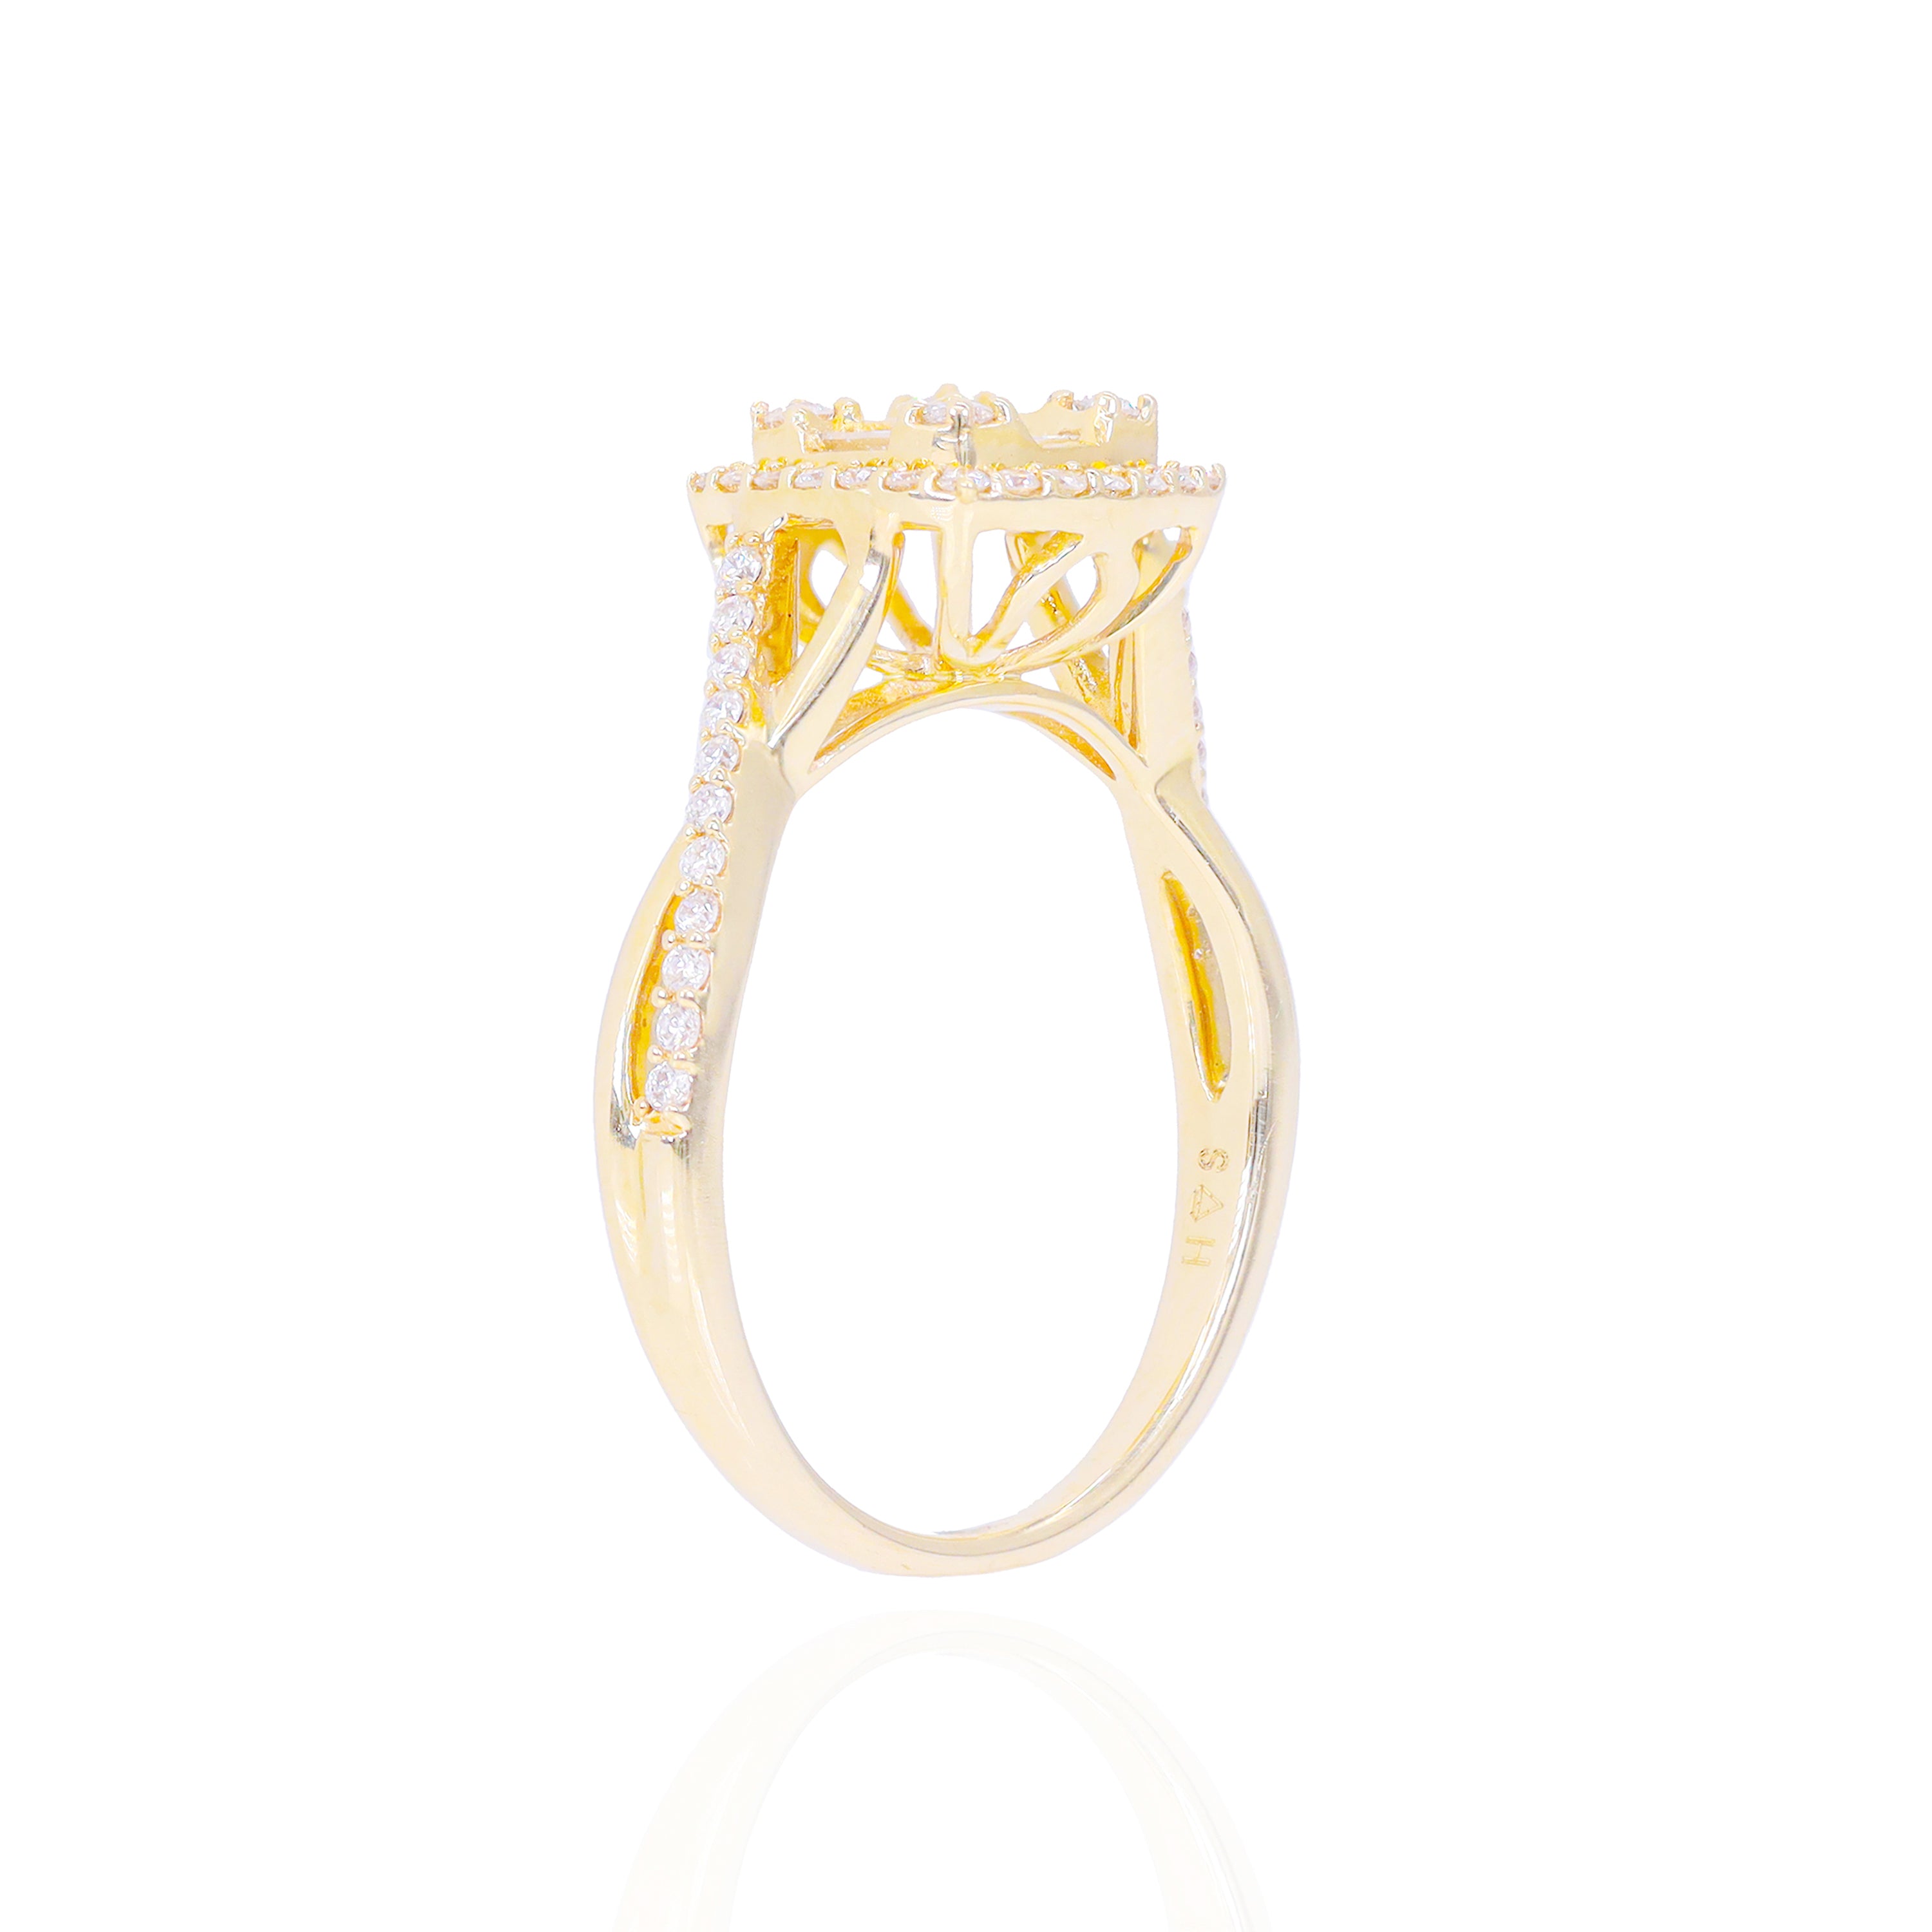 Princess Shaped with Halo and Woven Band Diamond Engagement Ring